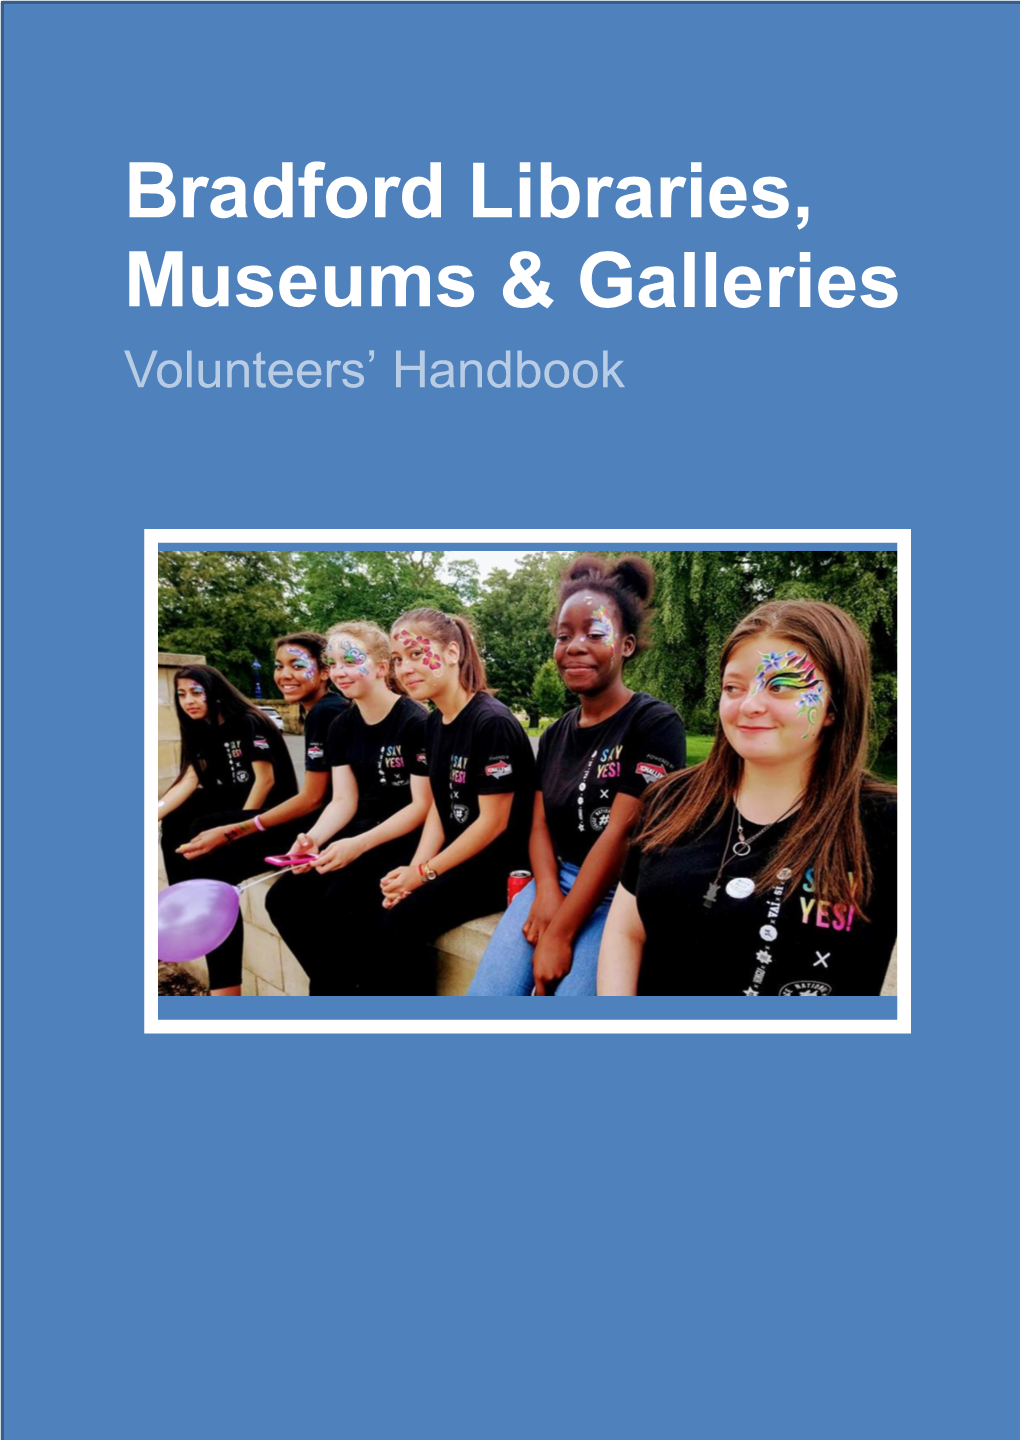 Bradford Libraries, Museums and Galleries Volunteer Policy